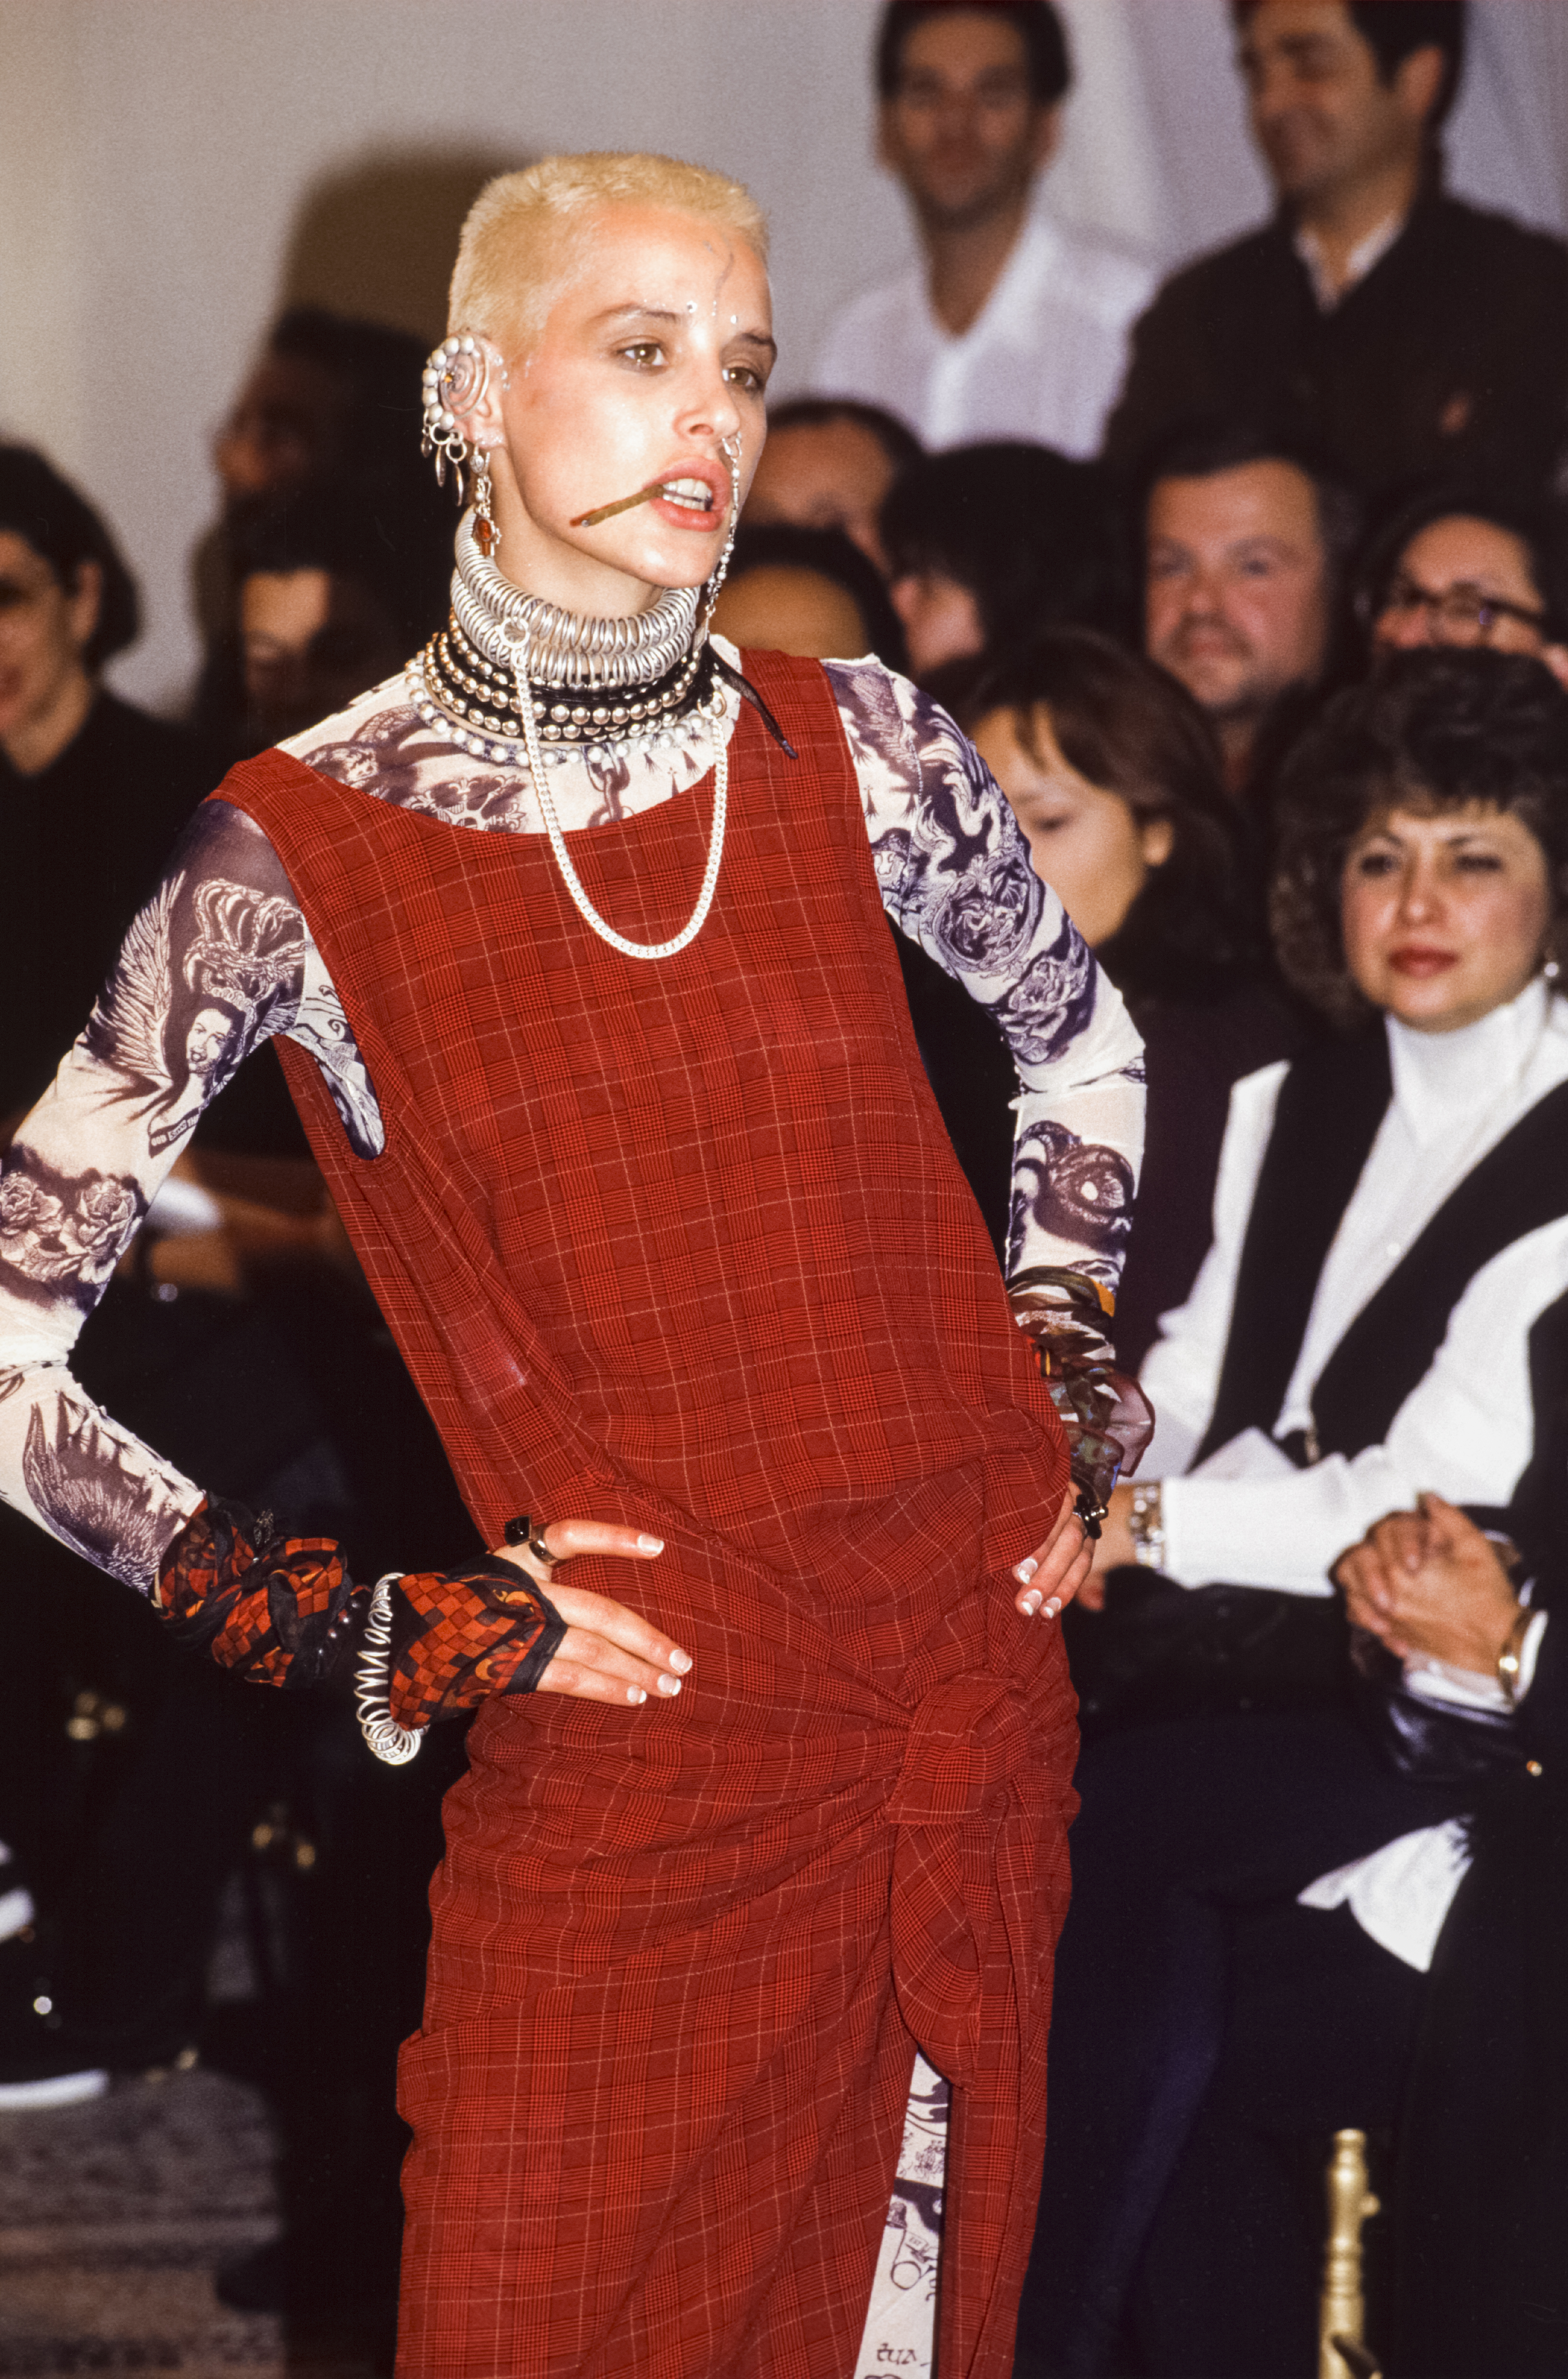 Jean Paul Gaultier's most iconic s moments